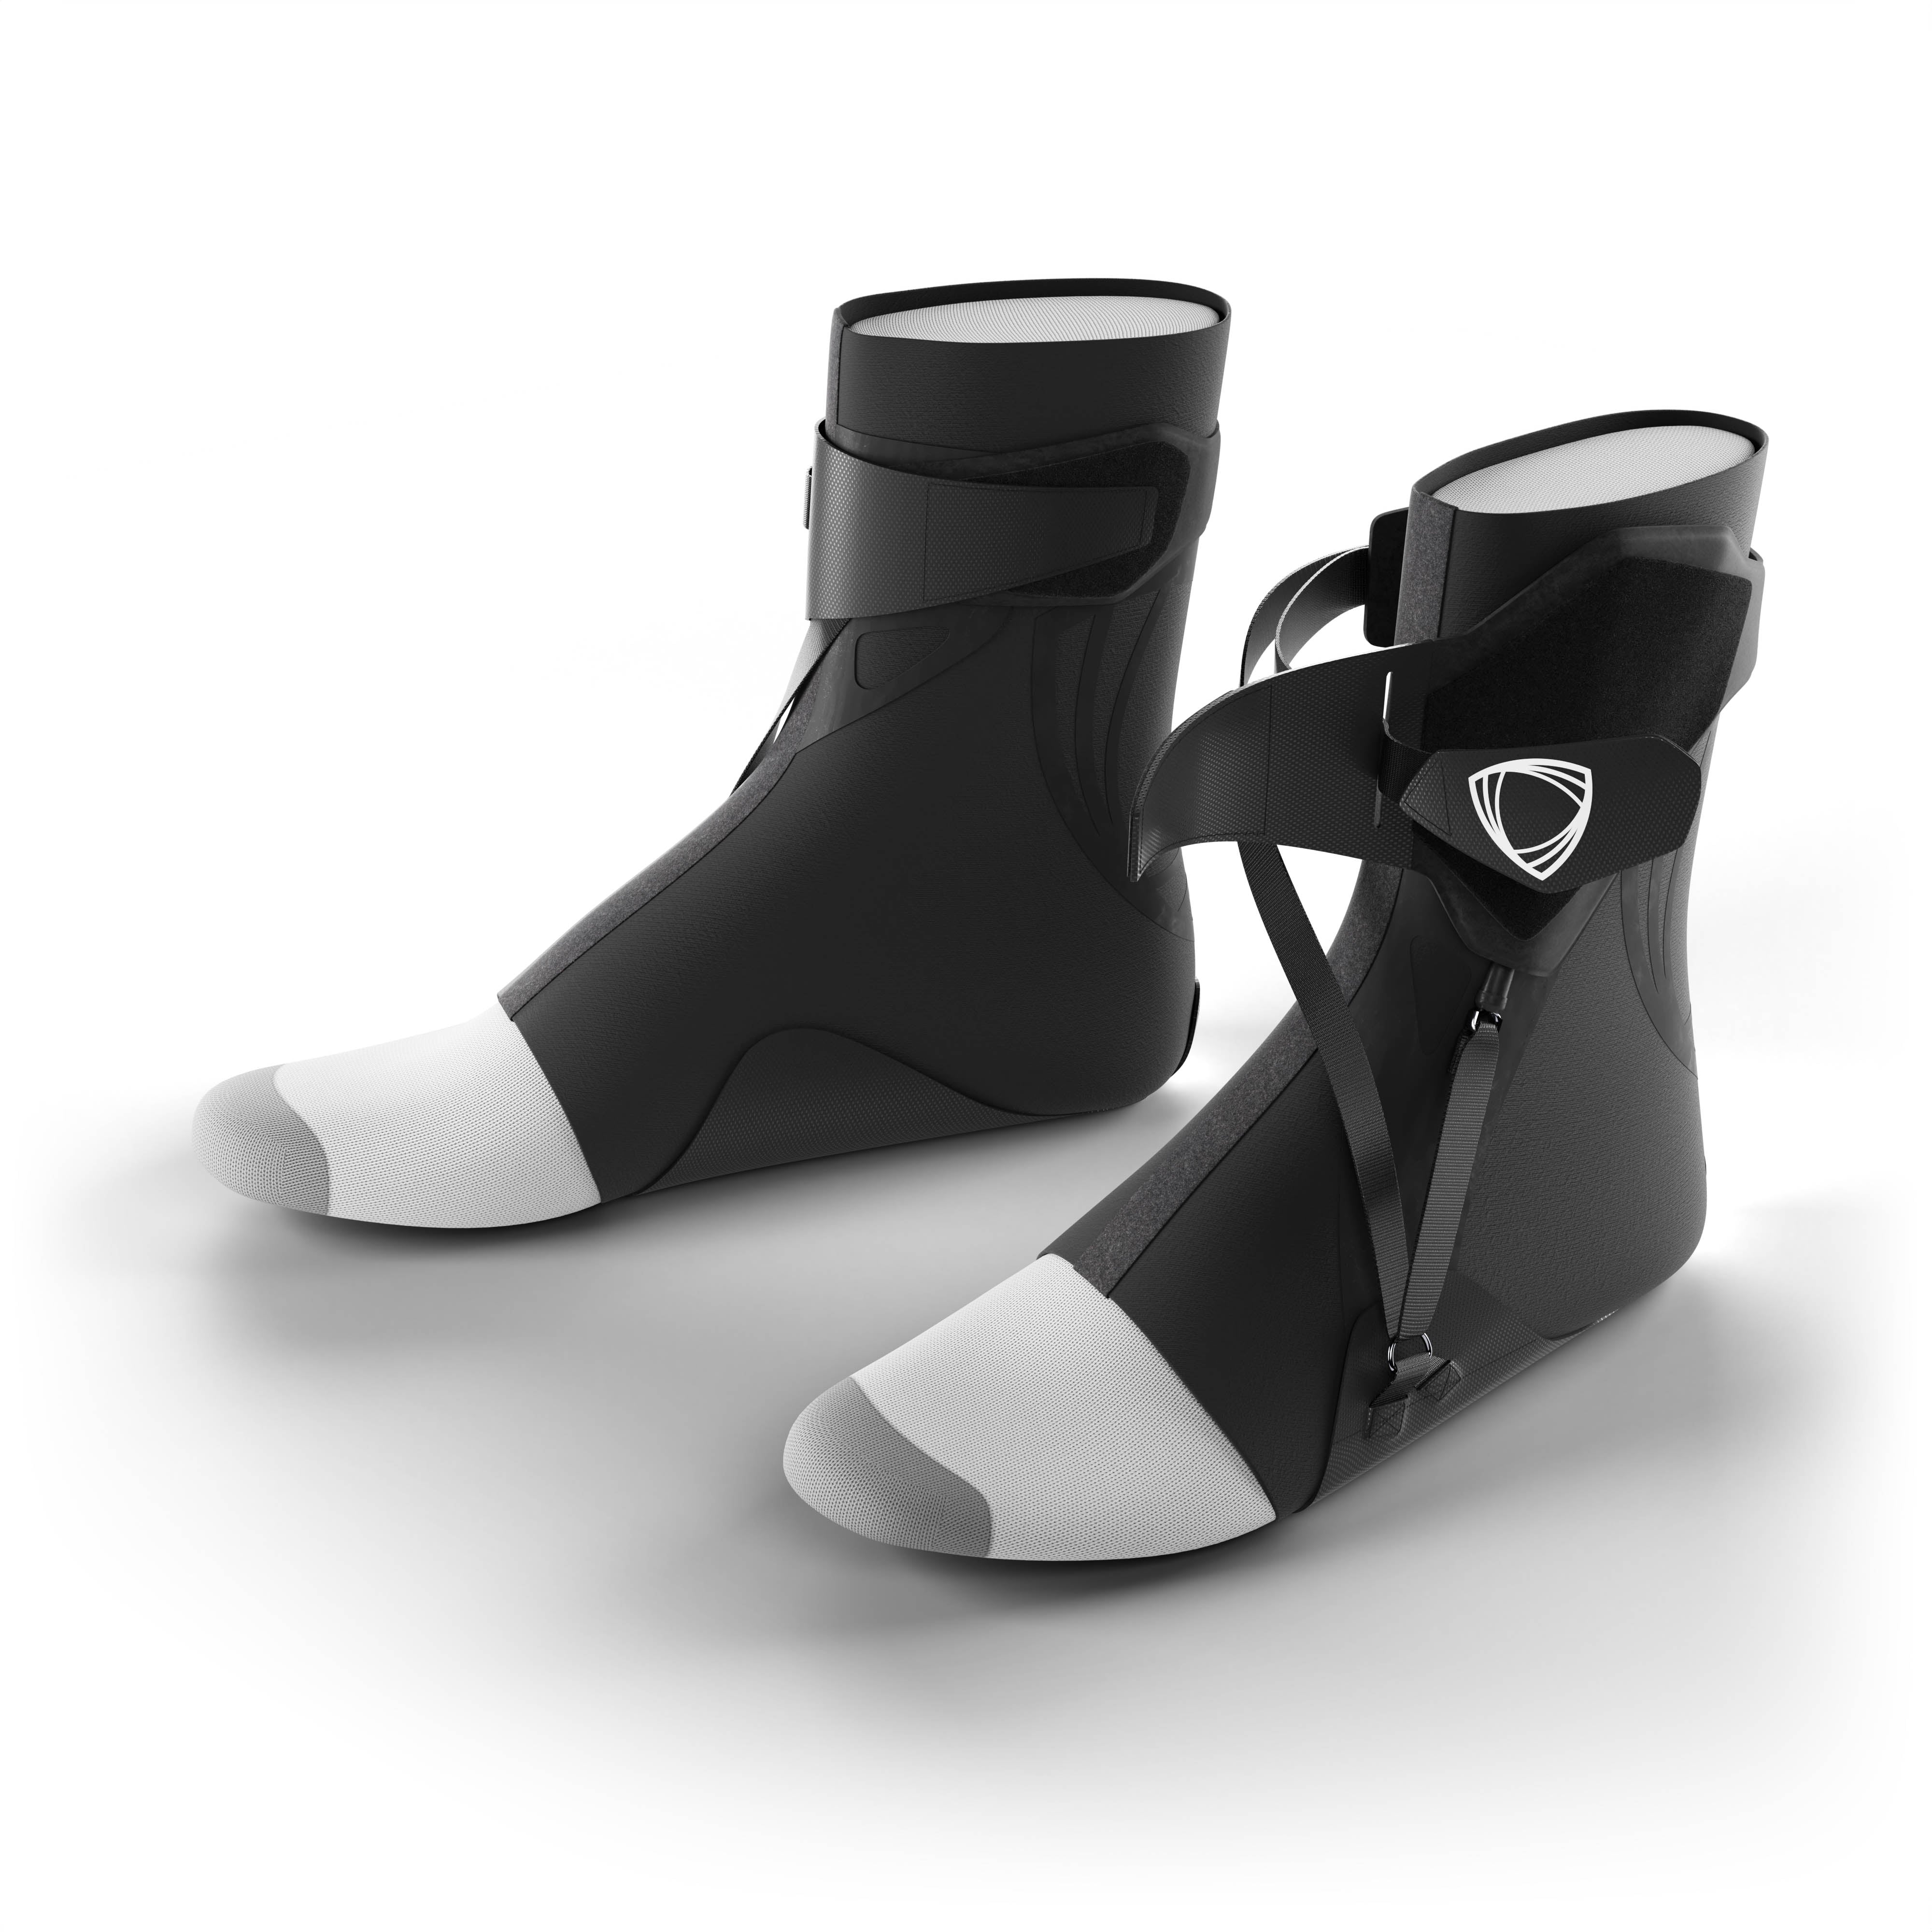 Pair of the best ankle braces for all sports ankle support. Open view with adjustable straps and mini ankle stabilizer. #color_black